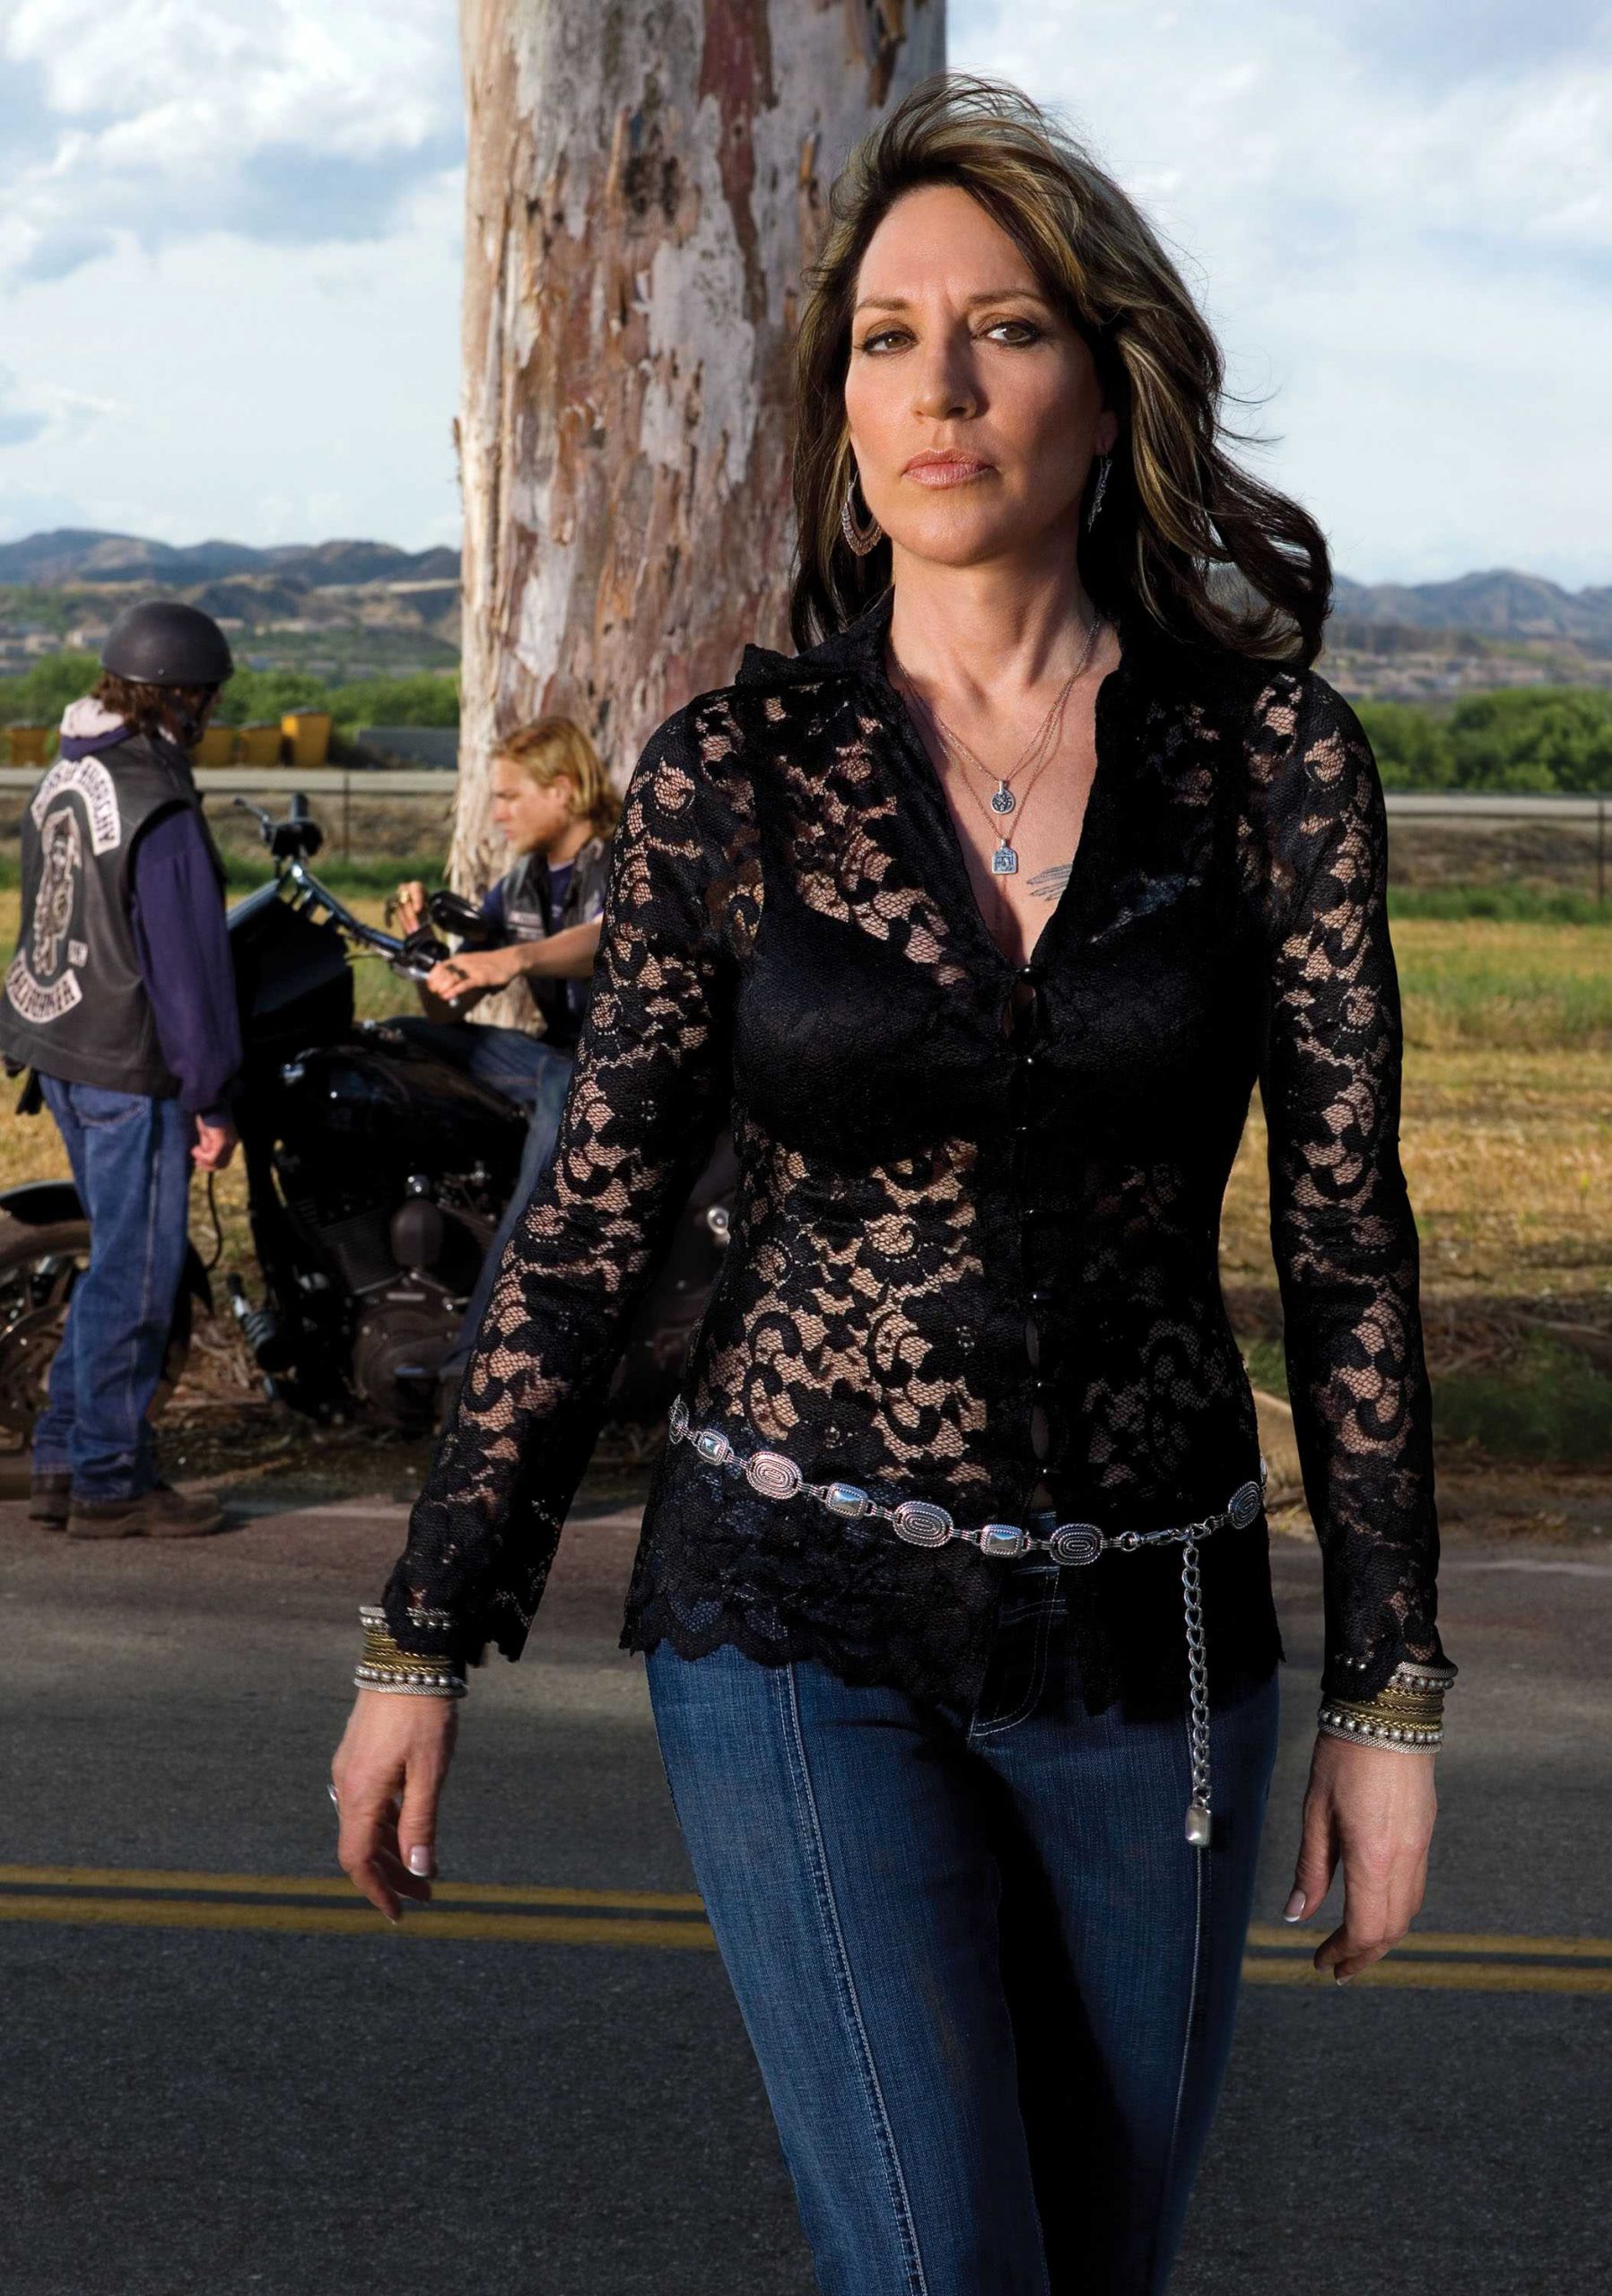 70+ Hot Pictures Of Katey Sagal Are Sexy As Hell 13